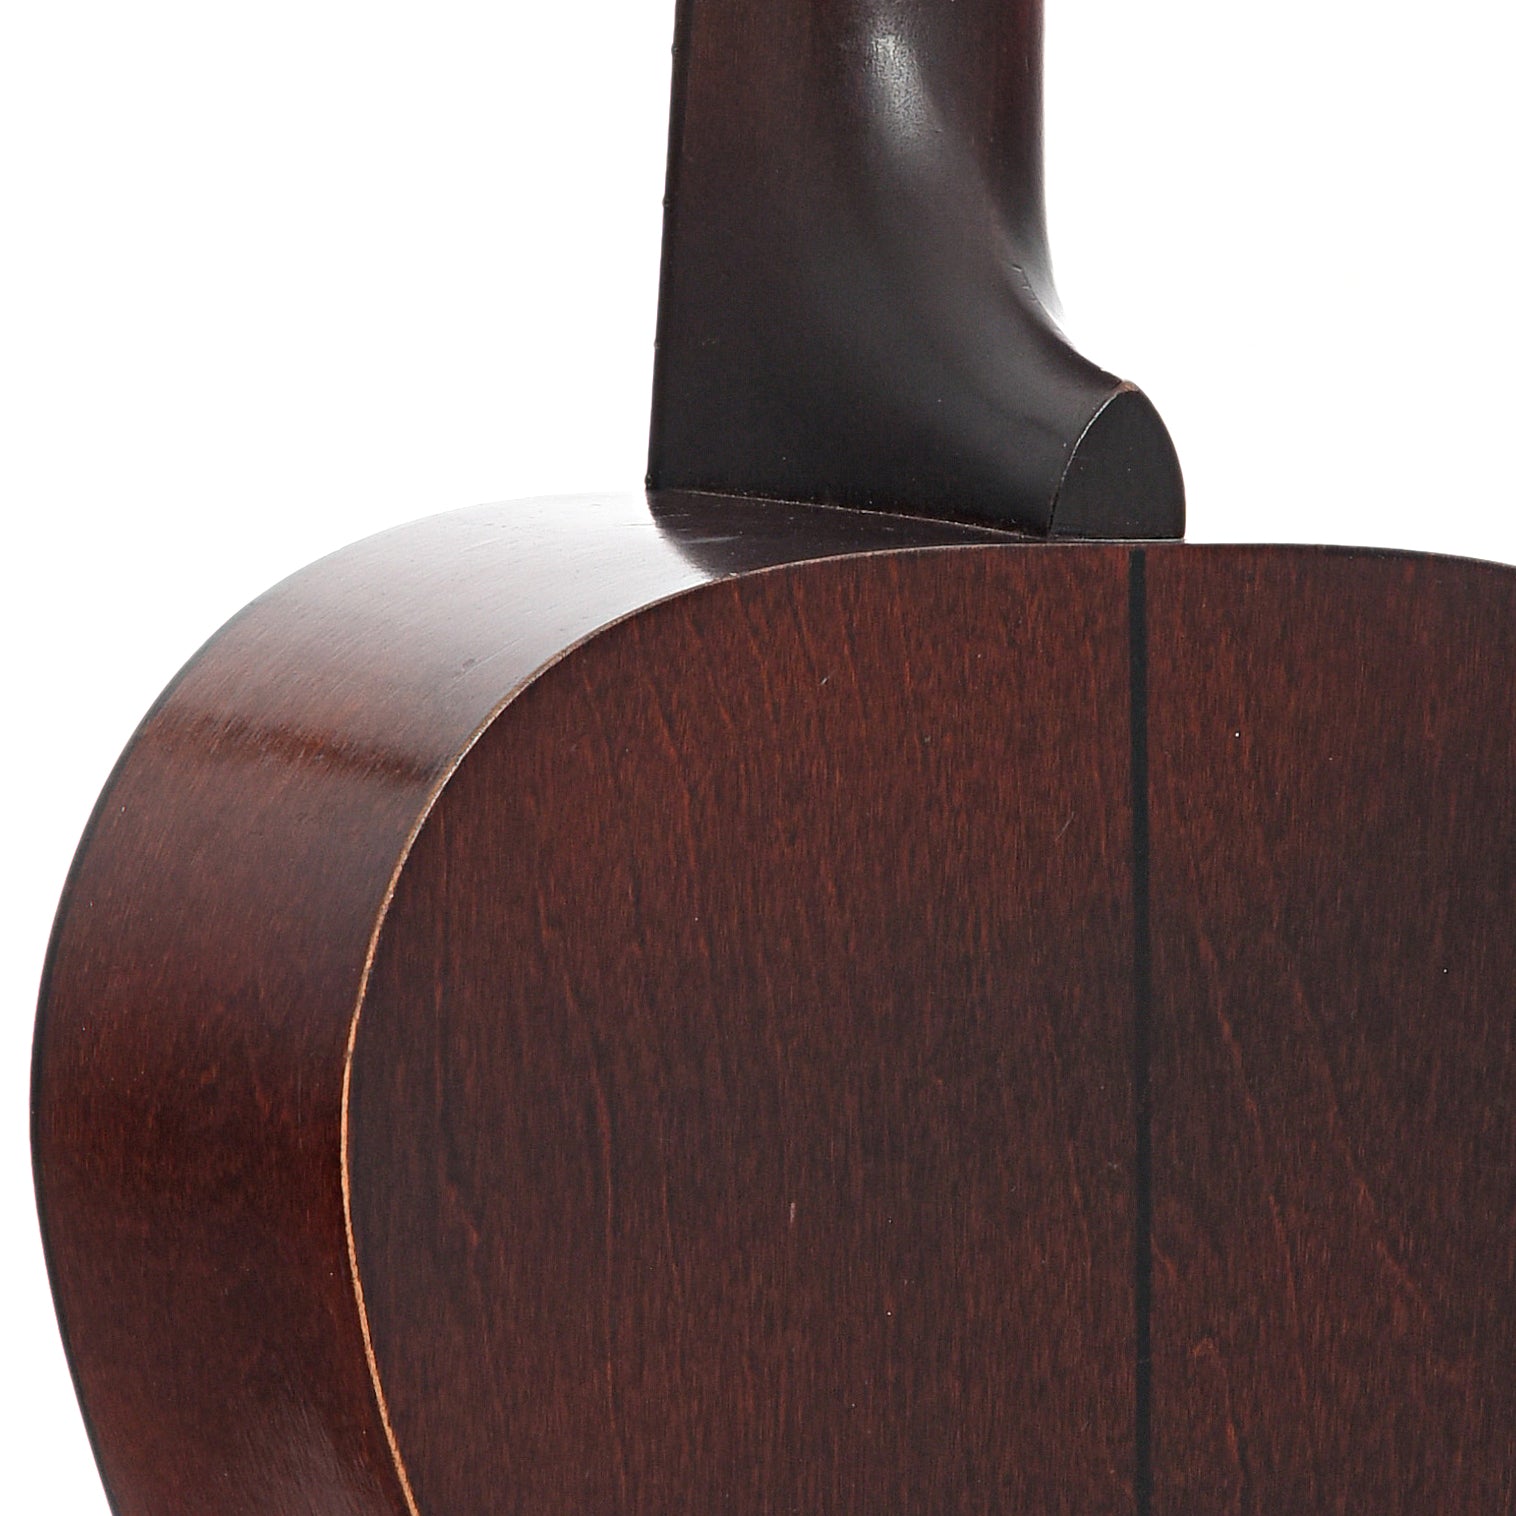 Heel of Slingerland May-Bell Style No.5 Parlor Guitar (1930s)